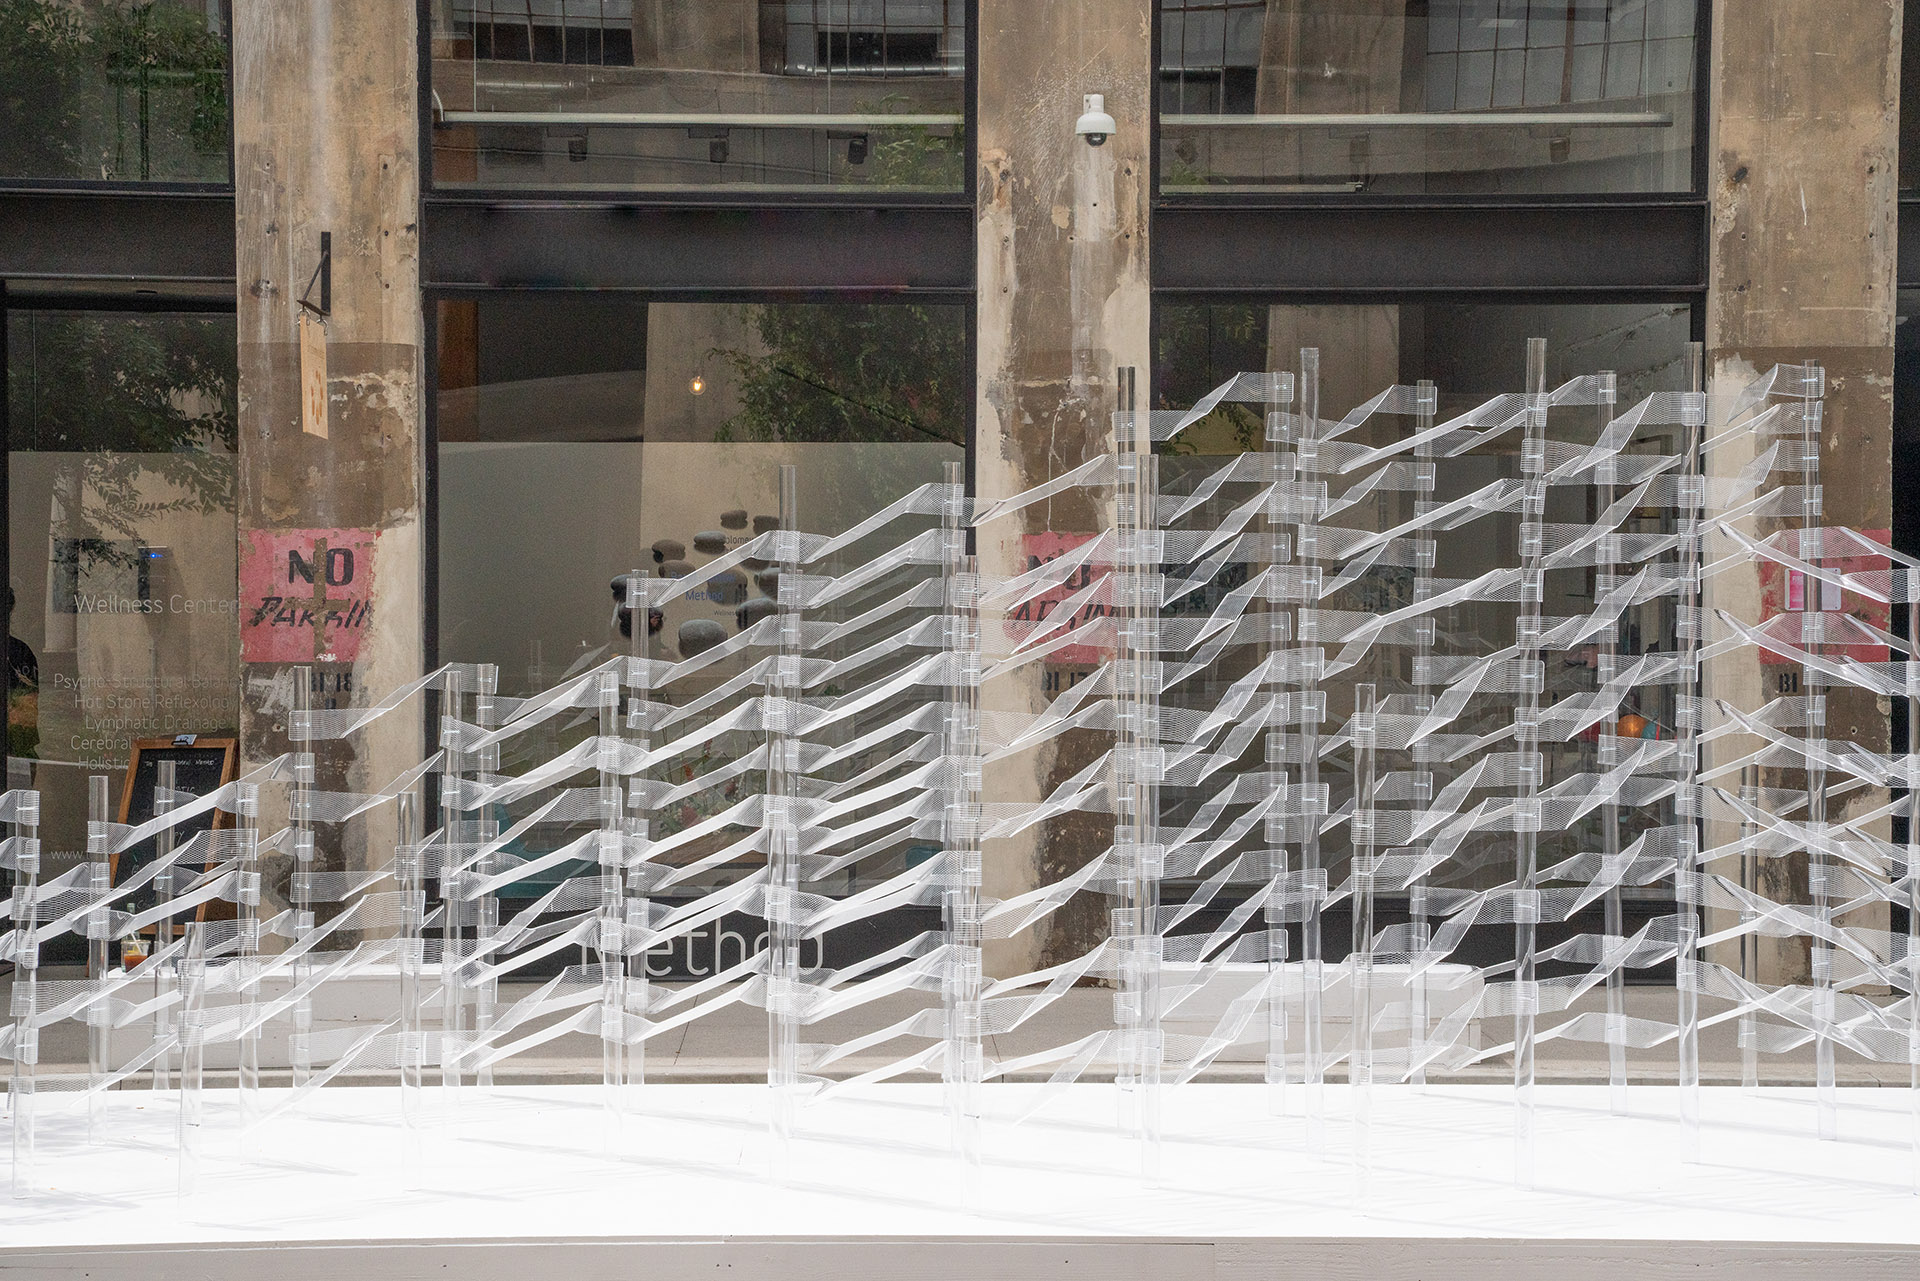 An installation which invites passersby to play with its transparent features